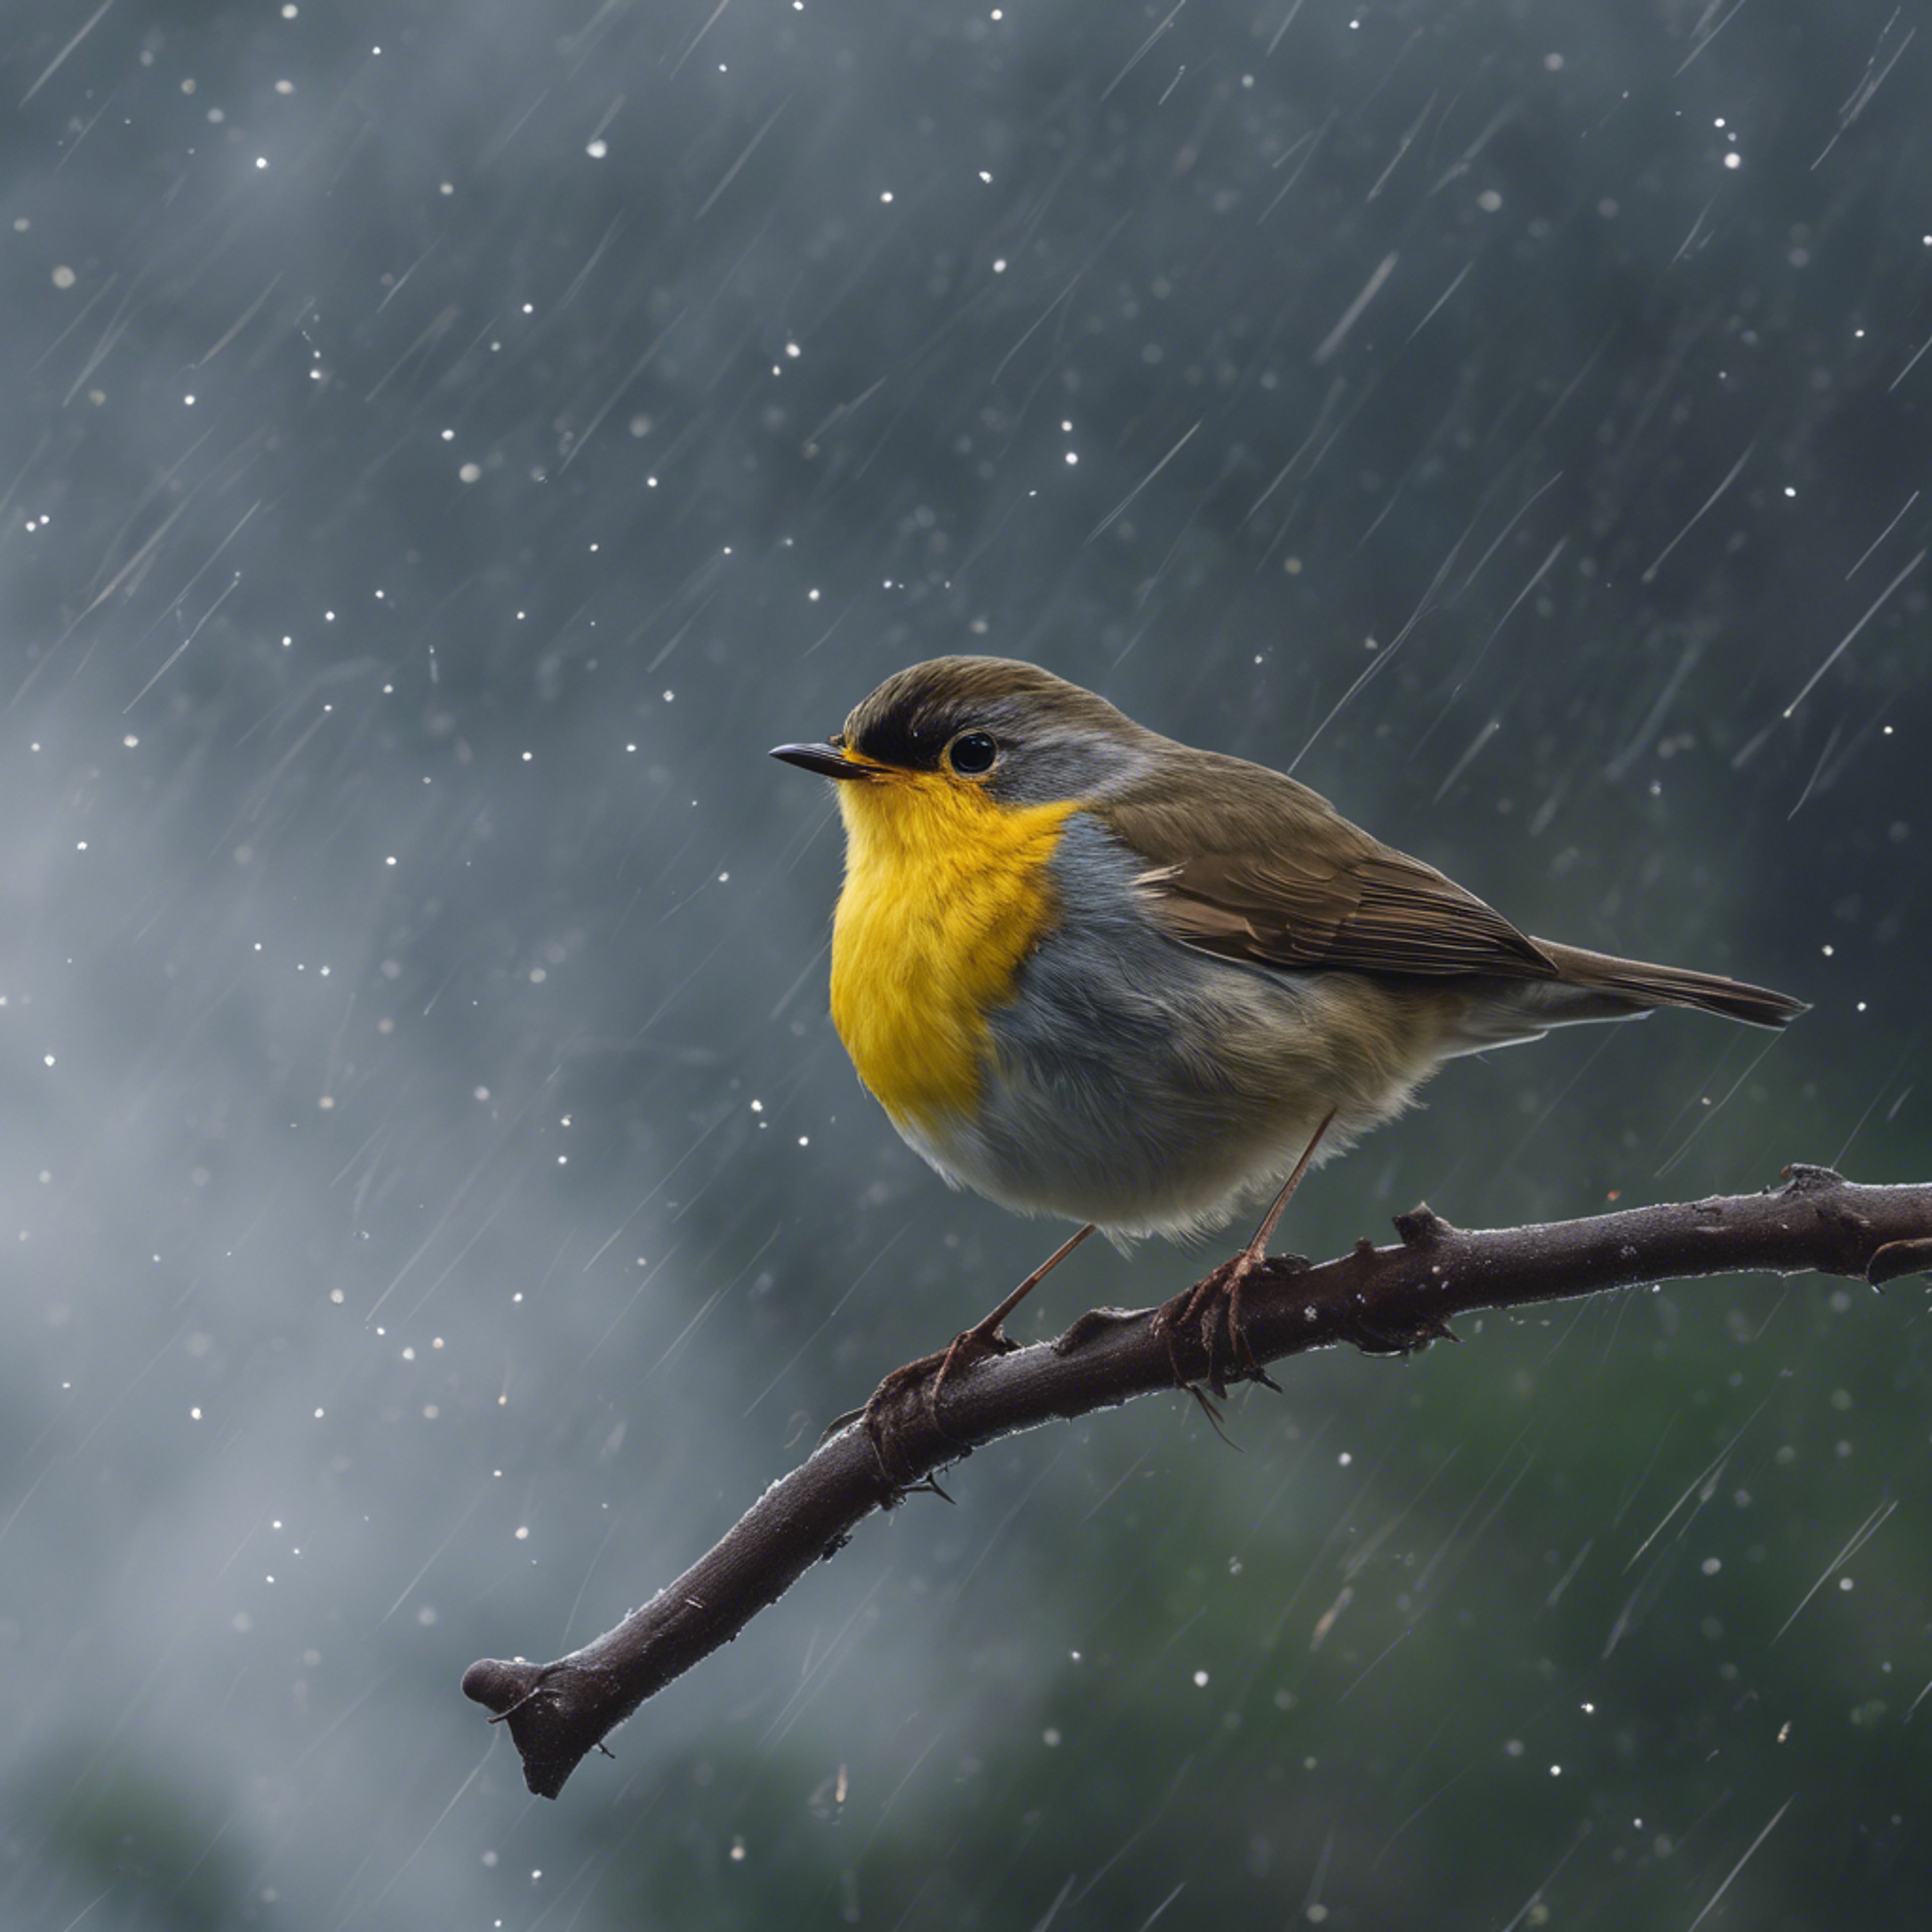 A yellow-breasted robin in mid-flight against a dark, stormy sky. Kertas dinding[14716aee78274faeac04]